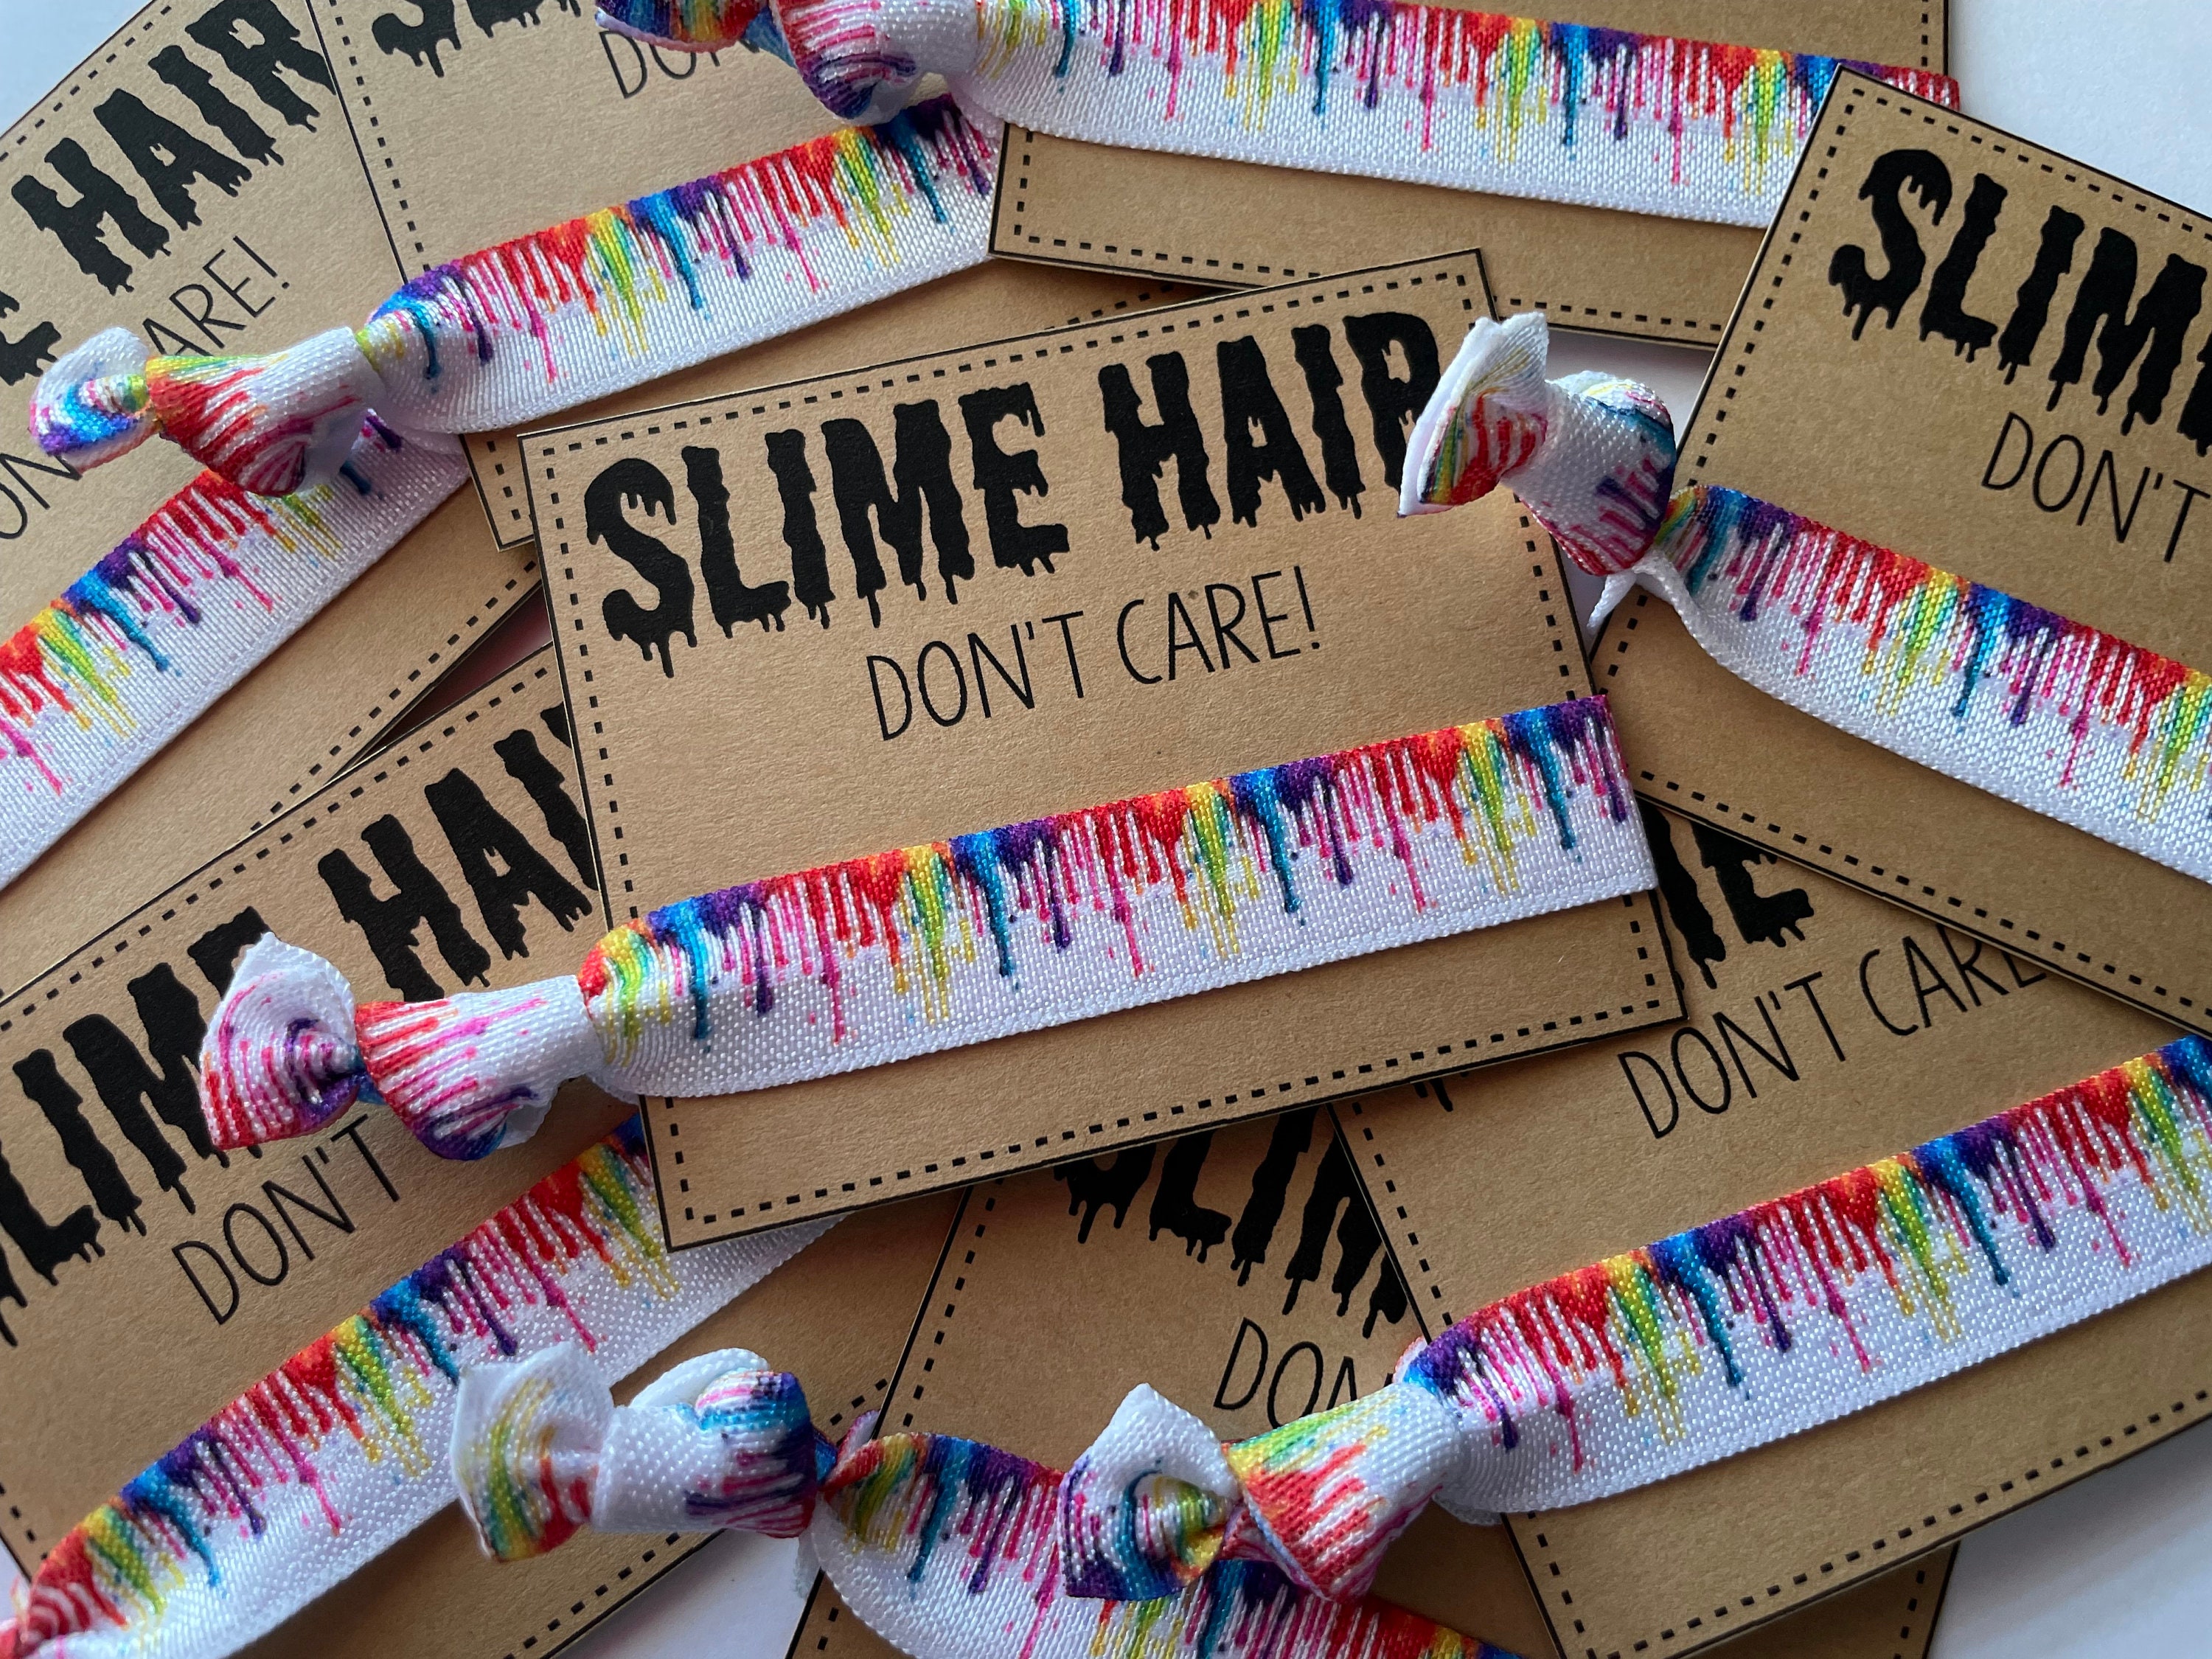 Slime Birthday Party Stickers or Favor Tags, Slime Birthday Decorations,  Slime Party Favors, Slime Party Favor Tags, Slime Party Stickers